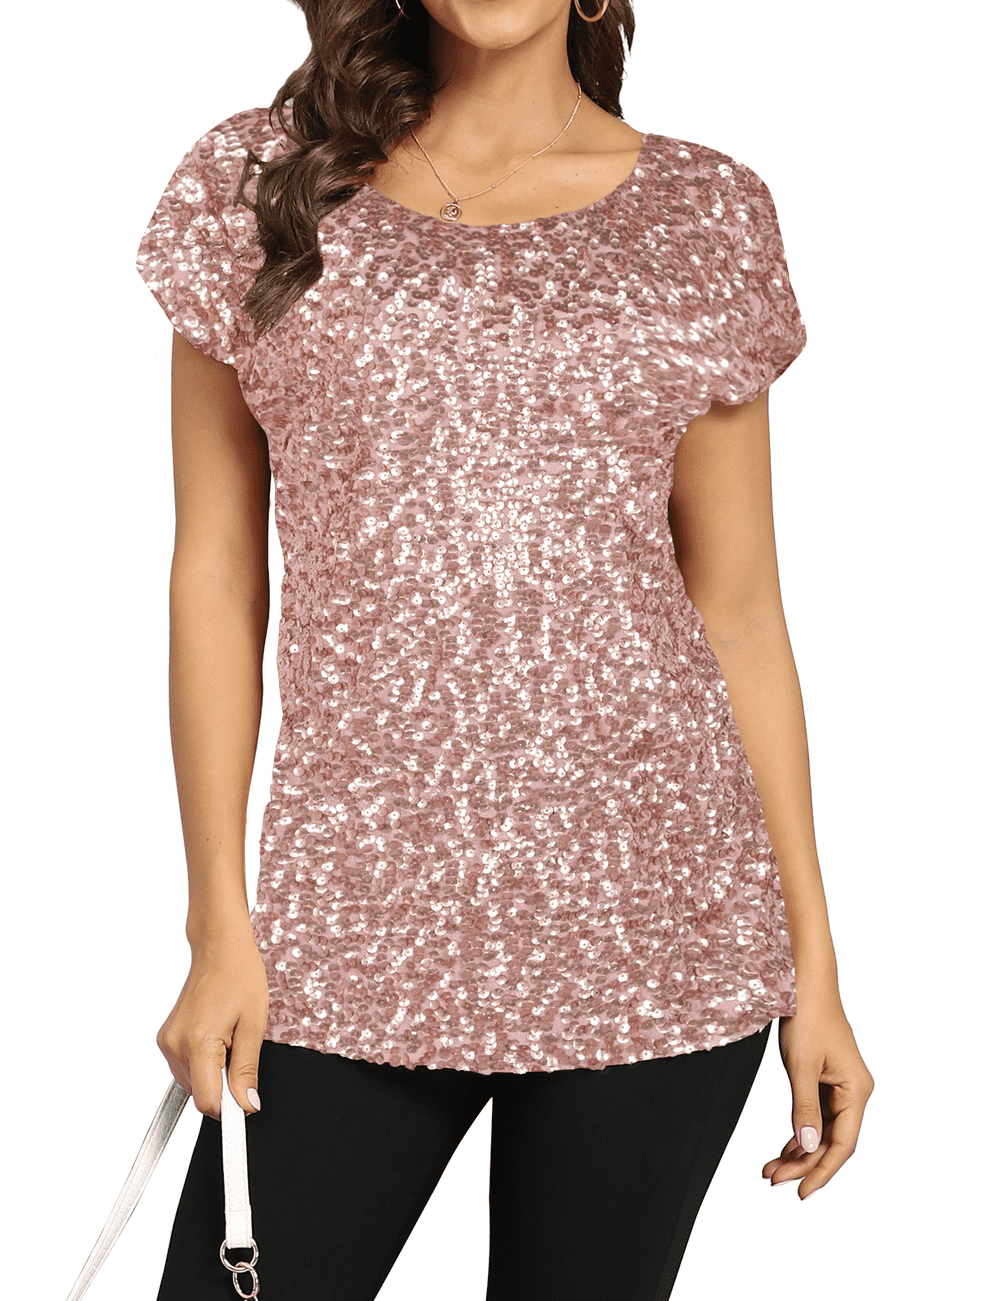 Women's Ladies Sequin Top Shimmer Glitter Loose Bat Sleeve Party Tunic Tops 9 